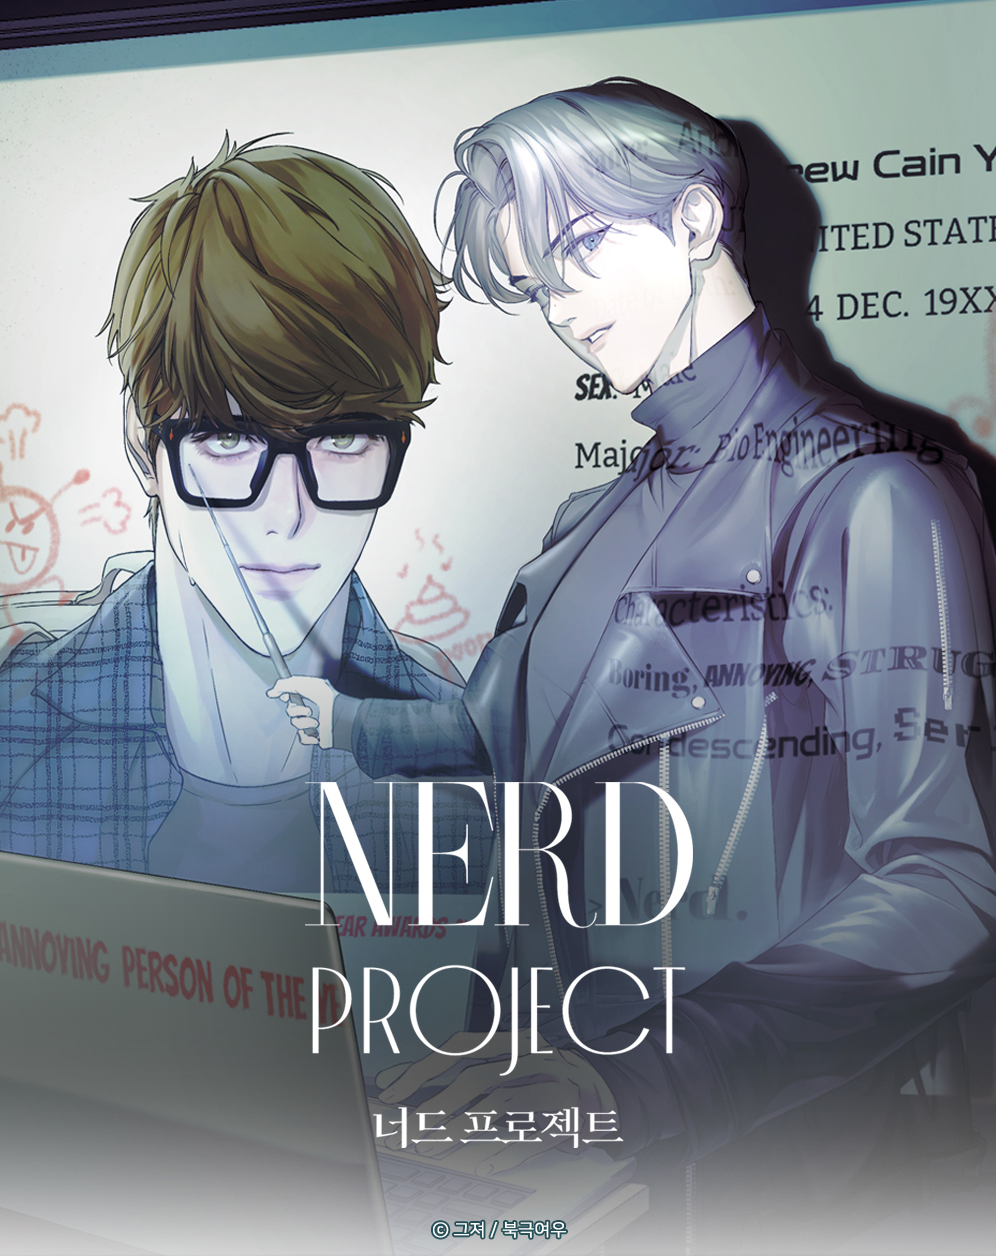 Nerd Project - Photocards